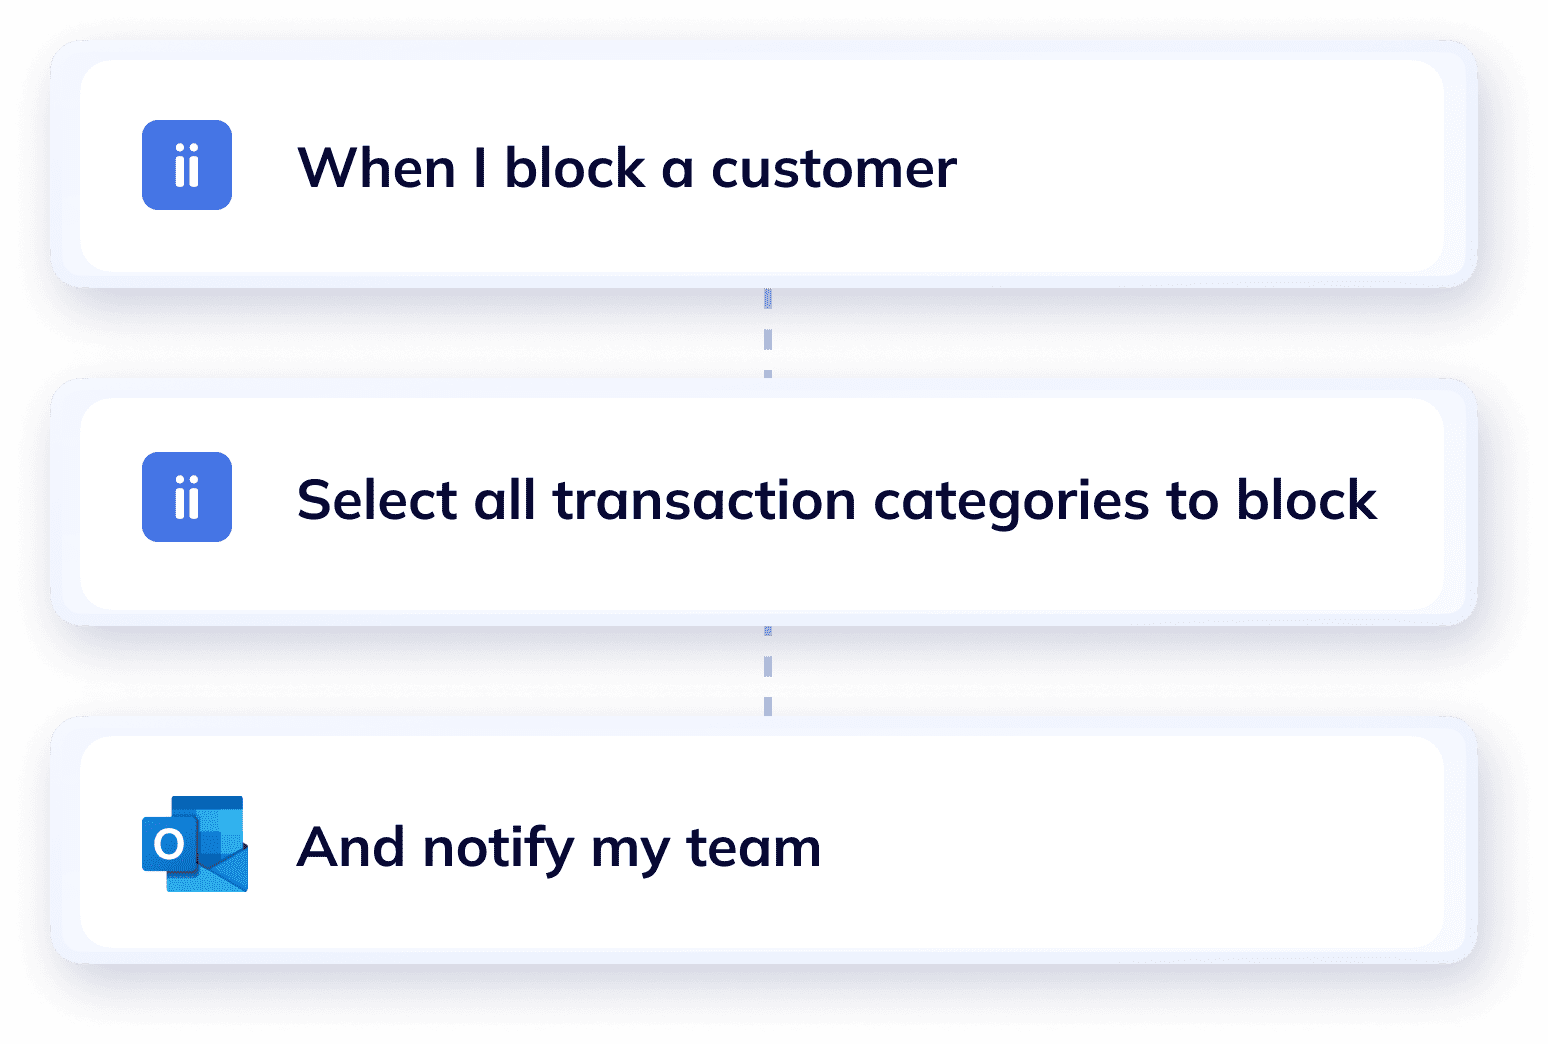 Workflow of blocking non-paying customers in Wiise